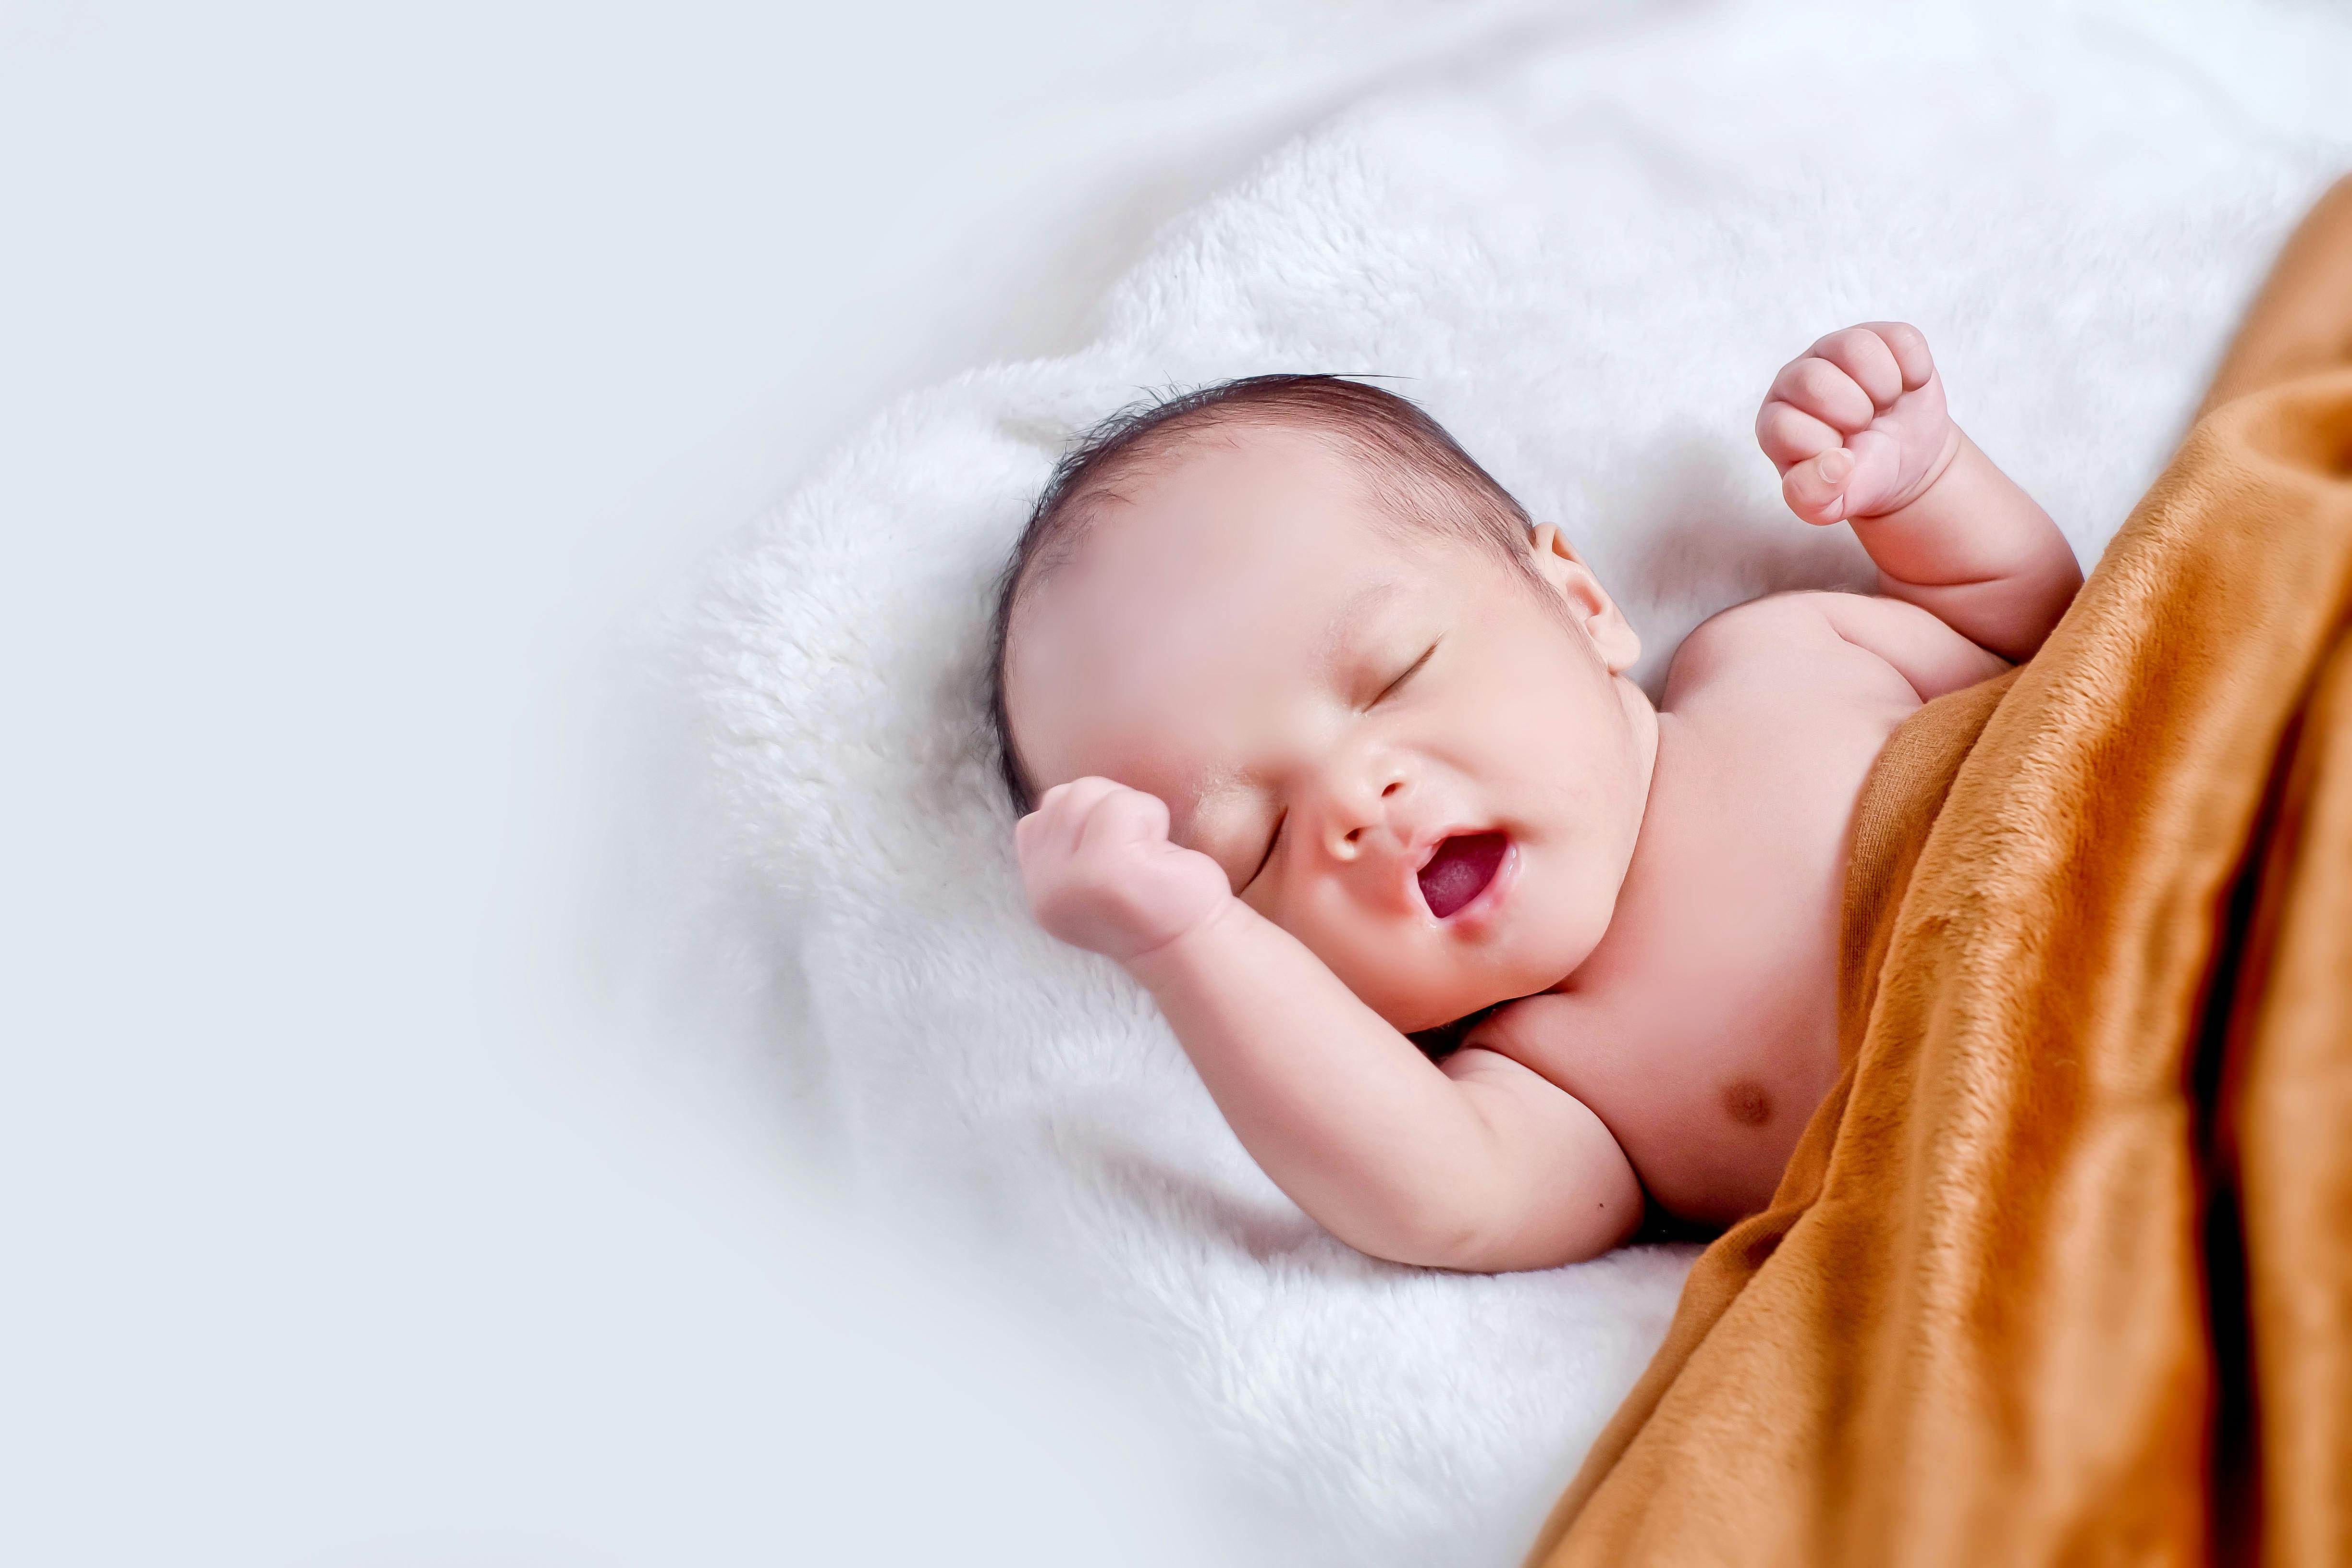 The best sustainable baby essentials to consider for your newborn, according to experts